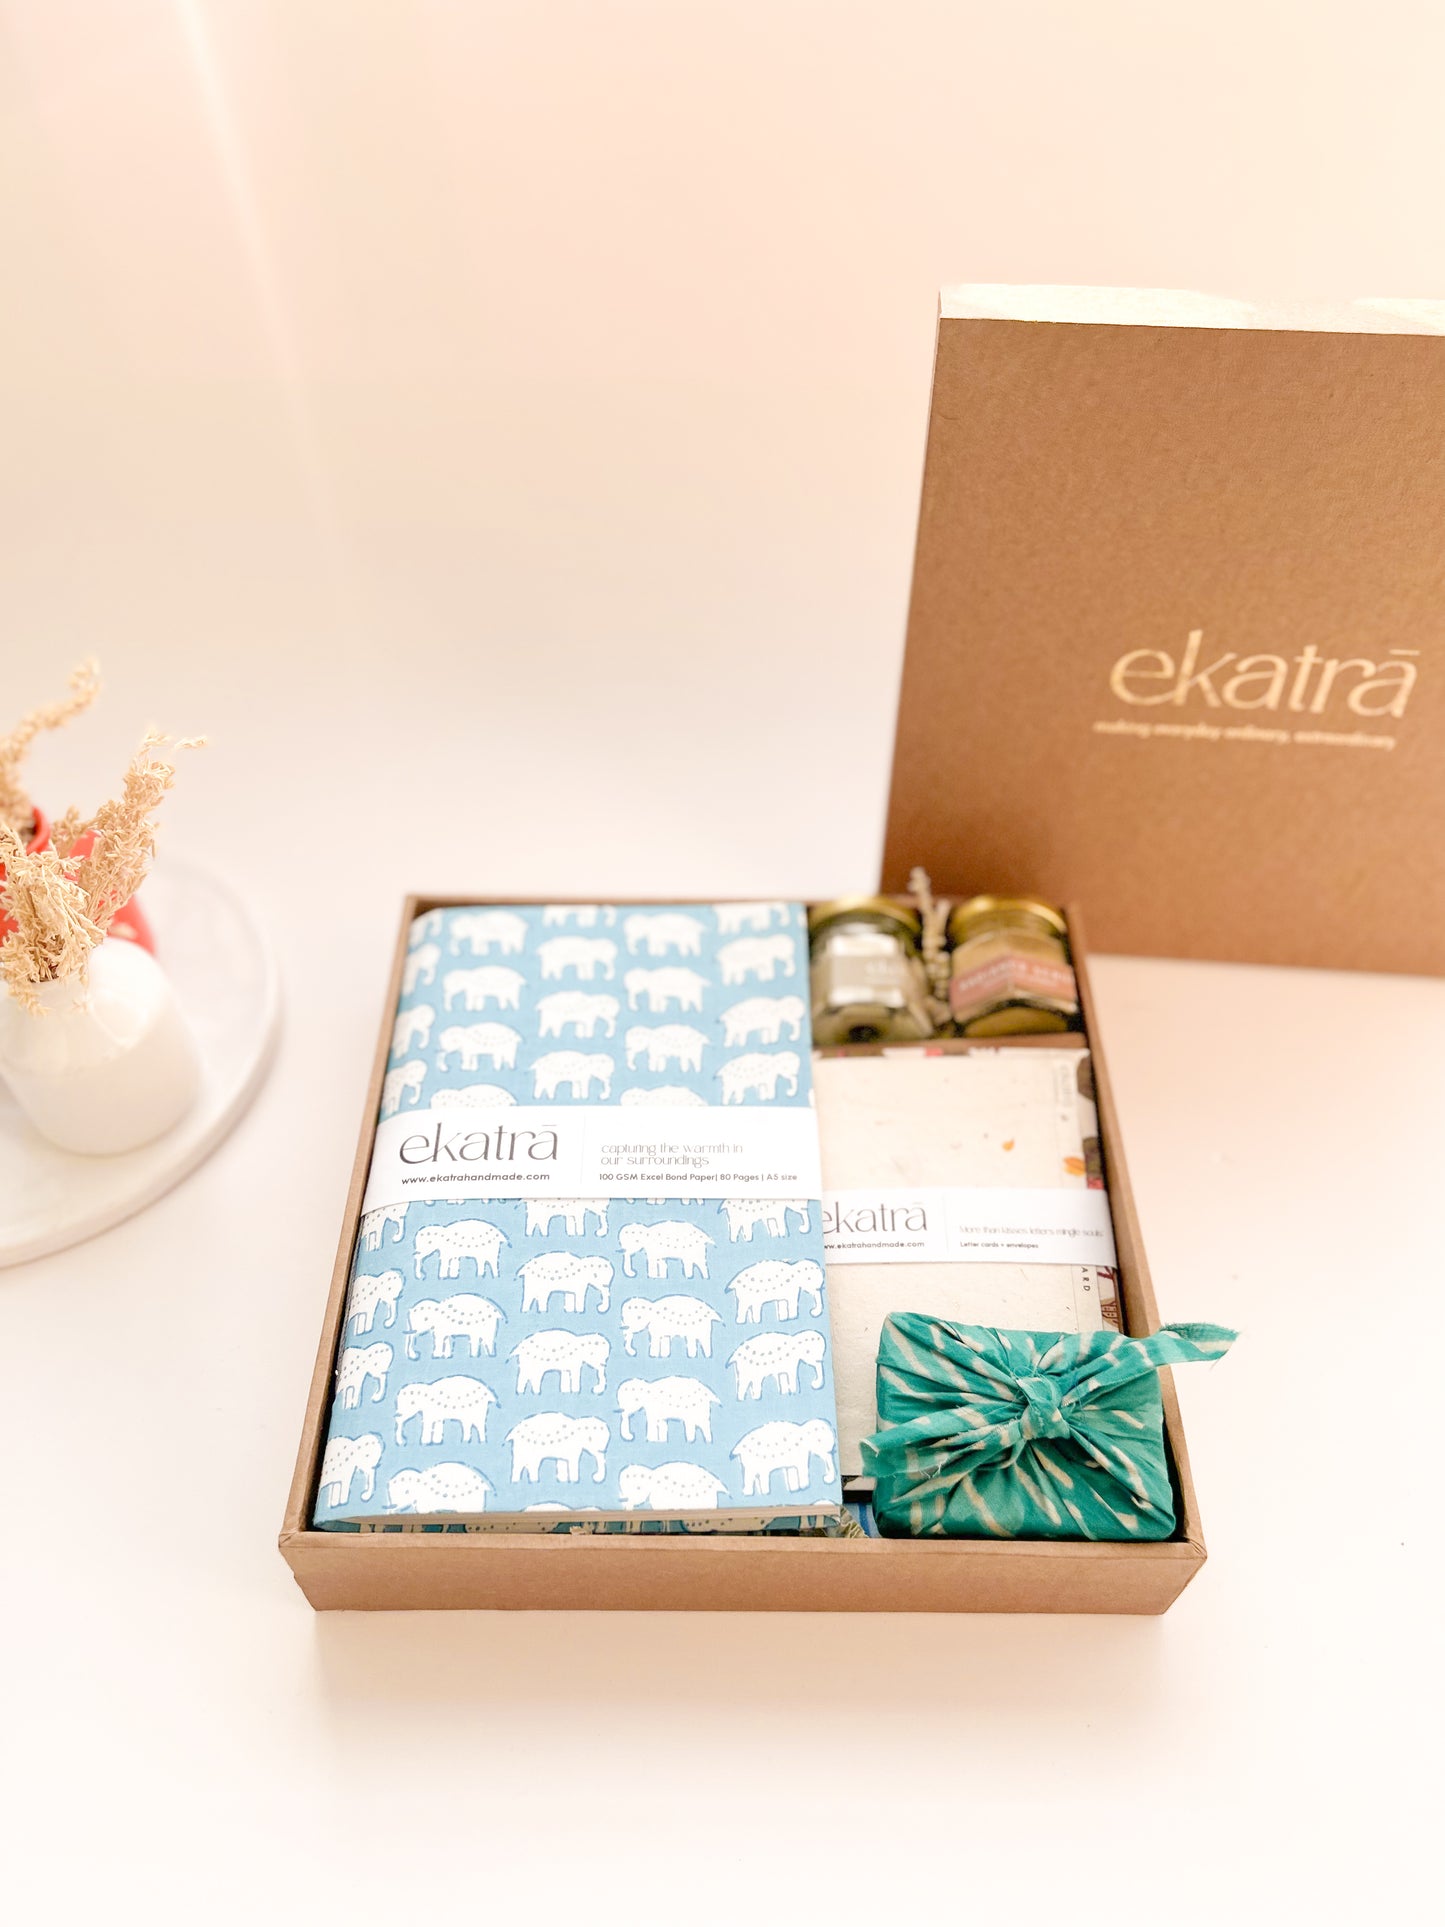 Sustainable Wellness Hamper for all by Ekatra - Elephant motif